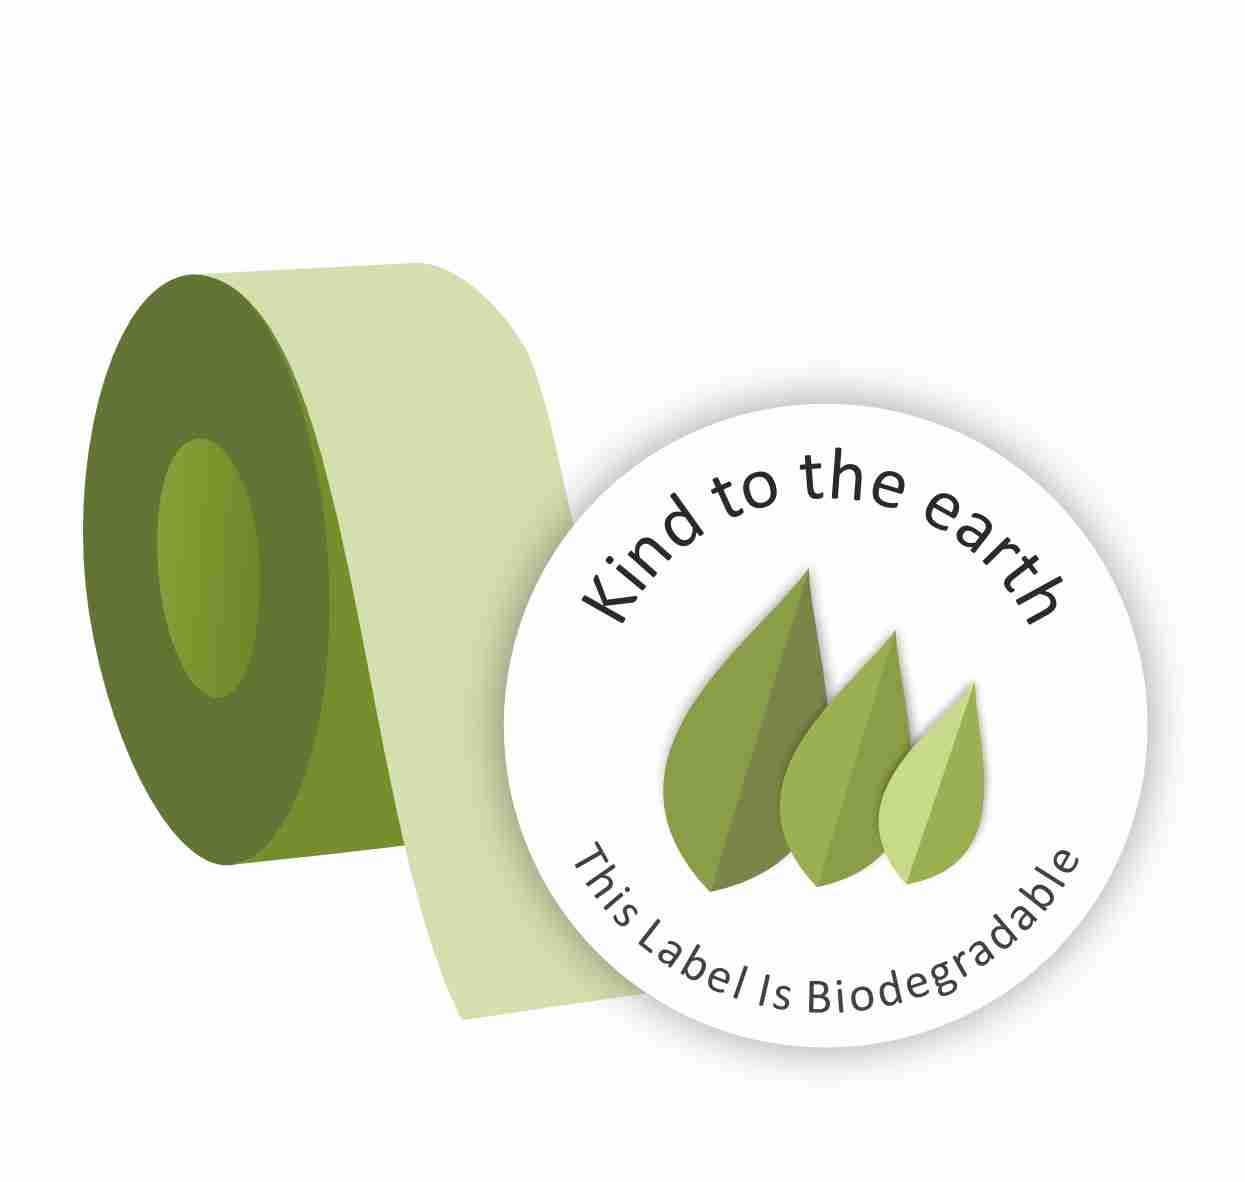 Biodegradable circular labels on a roll